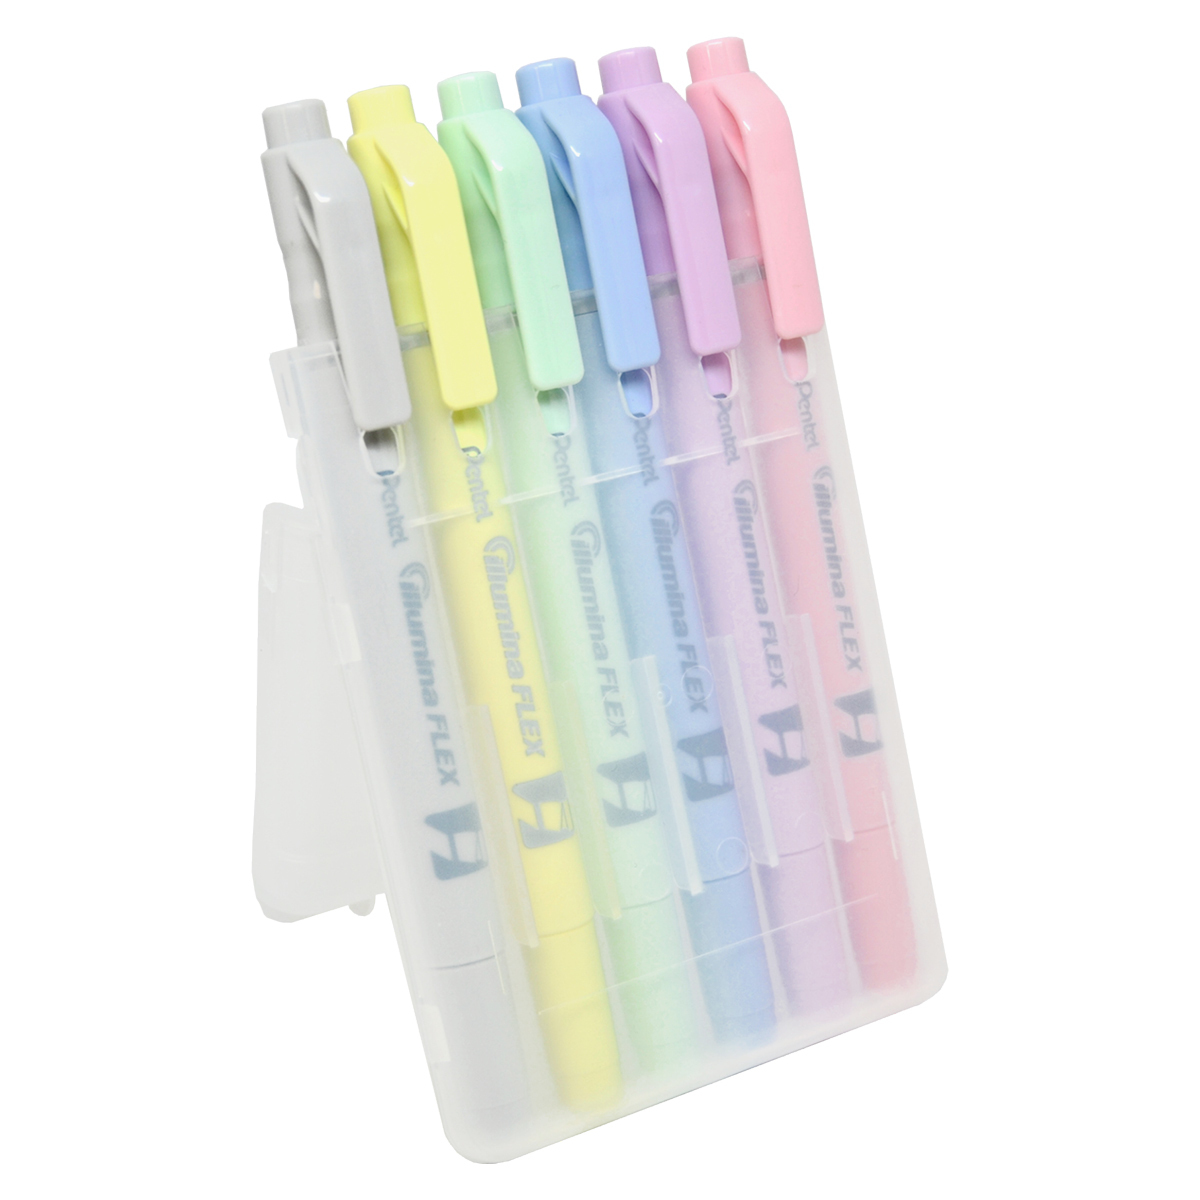 Illumina Flex Twin Pastel 6-pack in the group Pens / Office / Highlighters at Pen Store (128201)